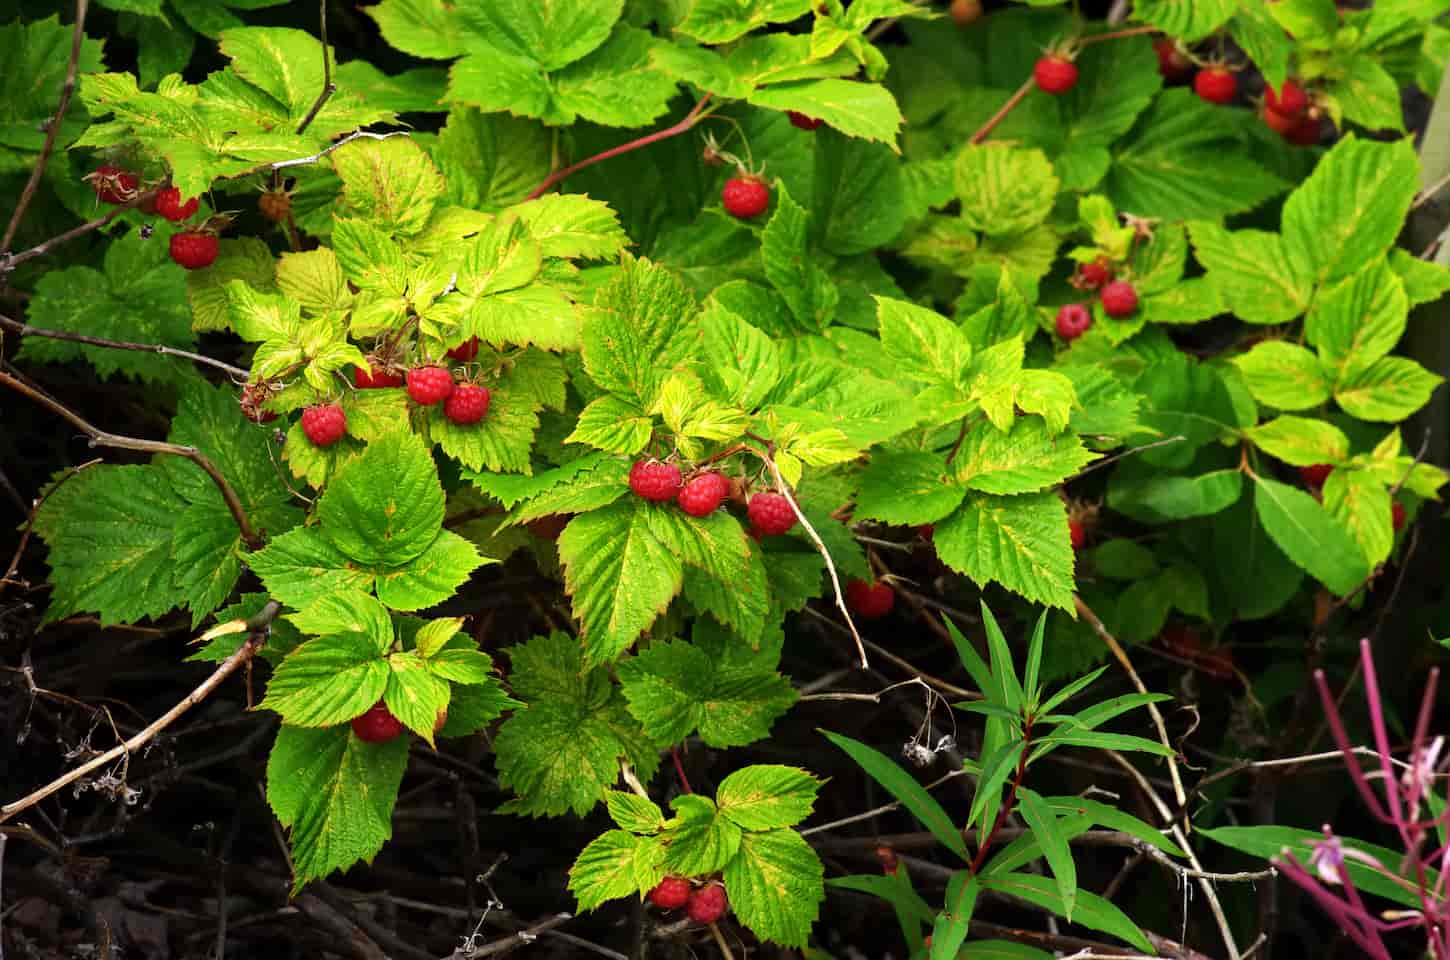 An image of a wild raspberry bush with bright ripe berries in the forest.